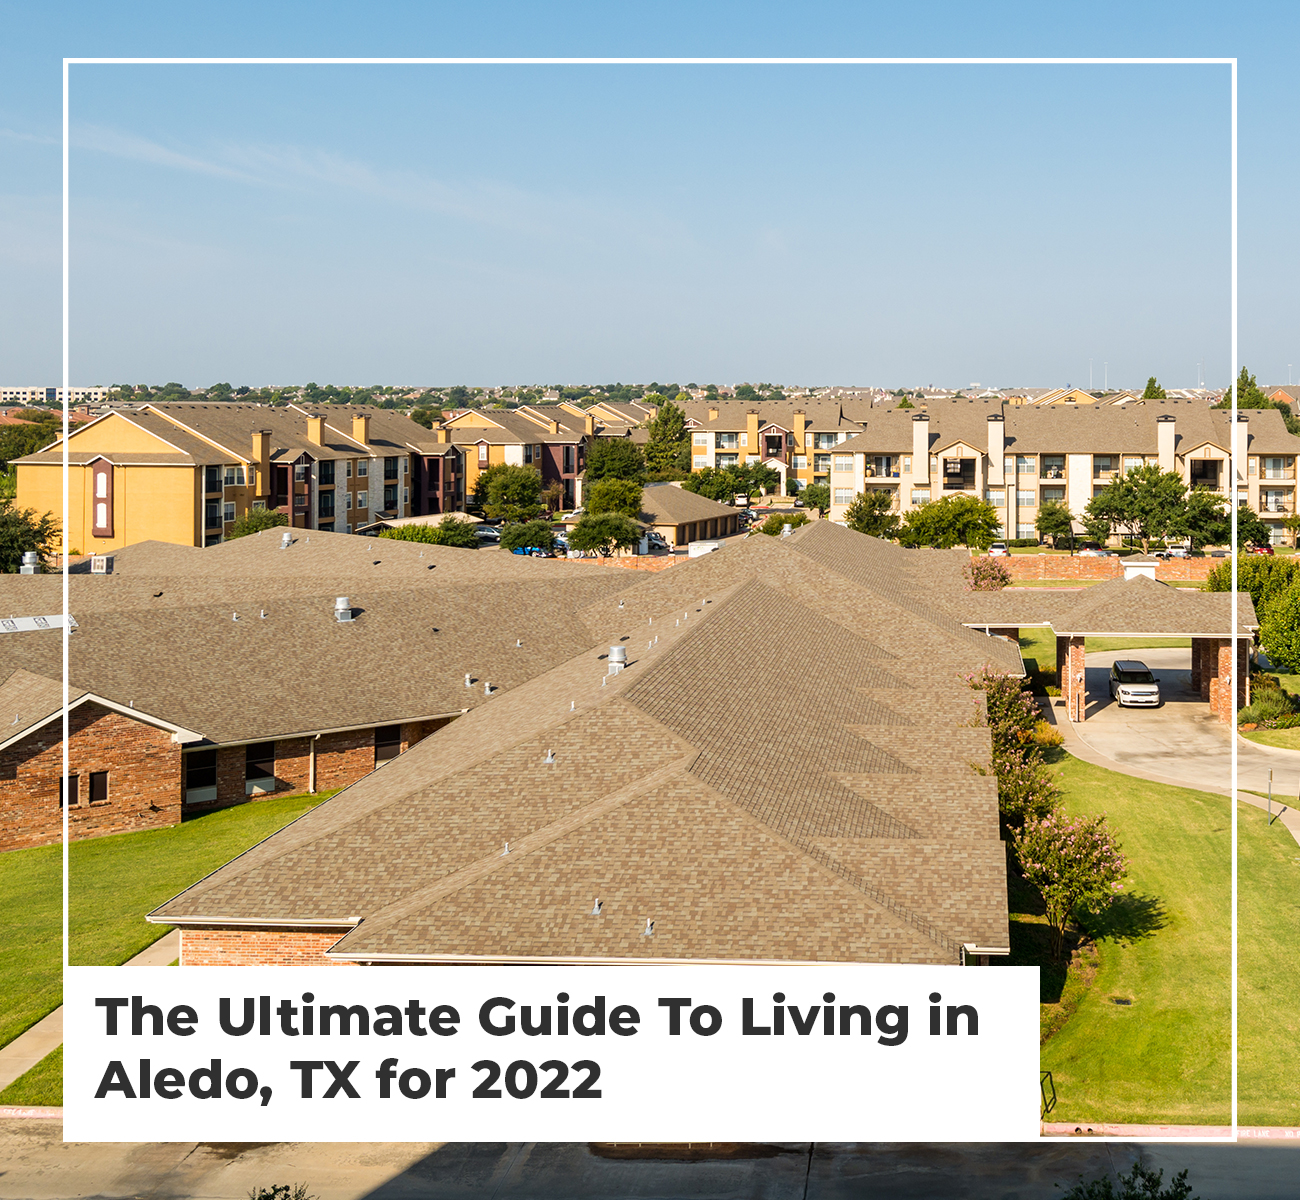 The Ultimate Guide to Living in Aledo, TX